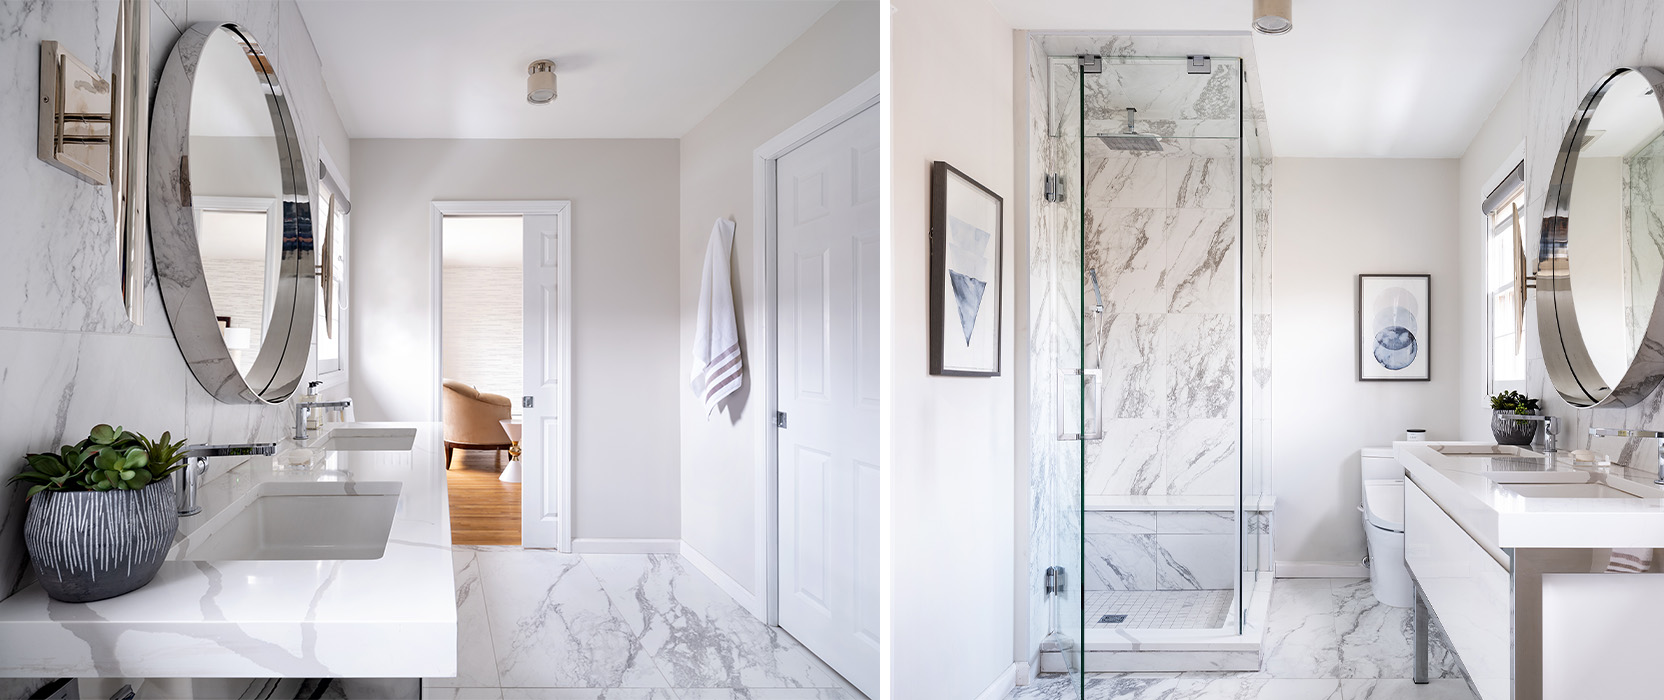 Two photos featuring opposite ends of white bathroom with rainfall shower, double vanity, marble floors and countertop and minimalist styling.